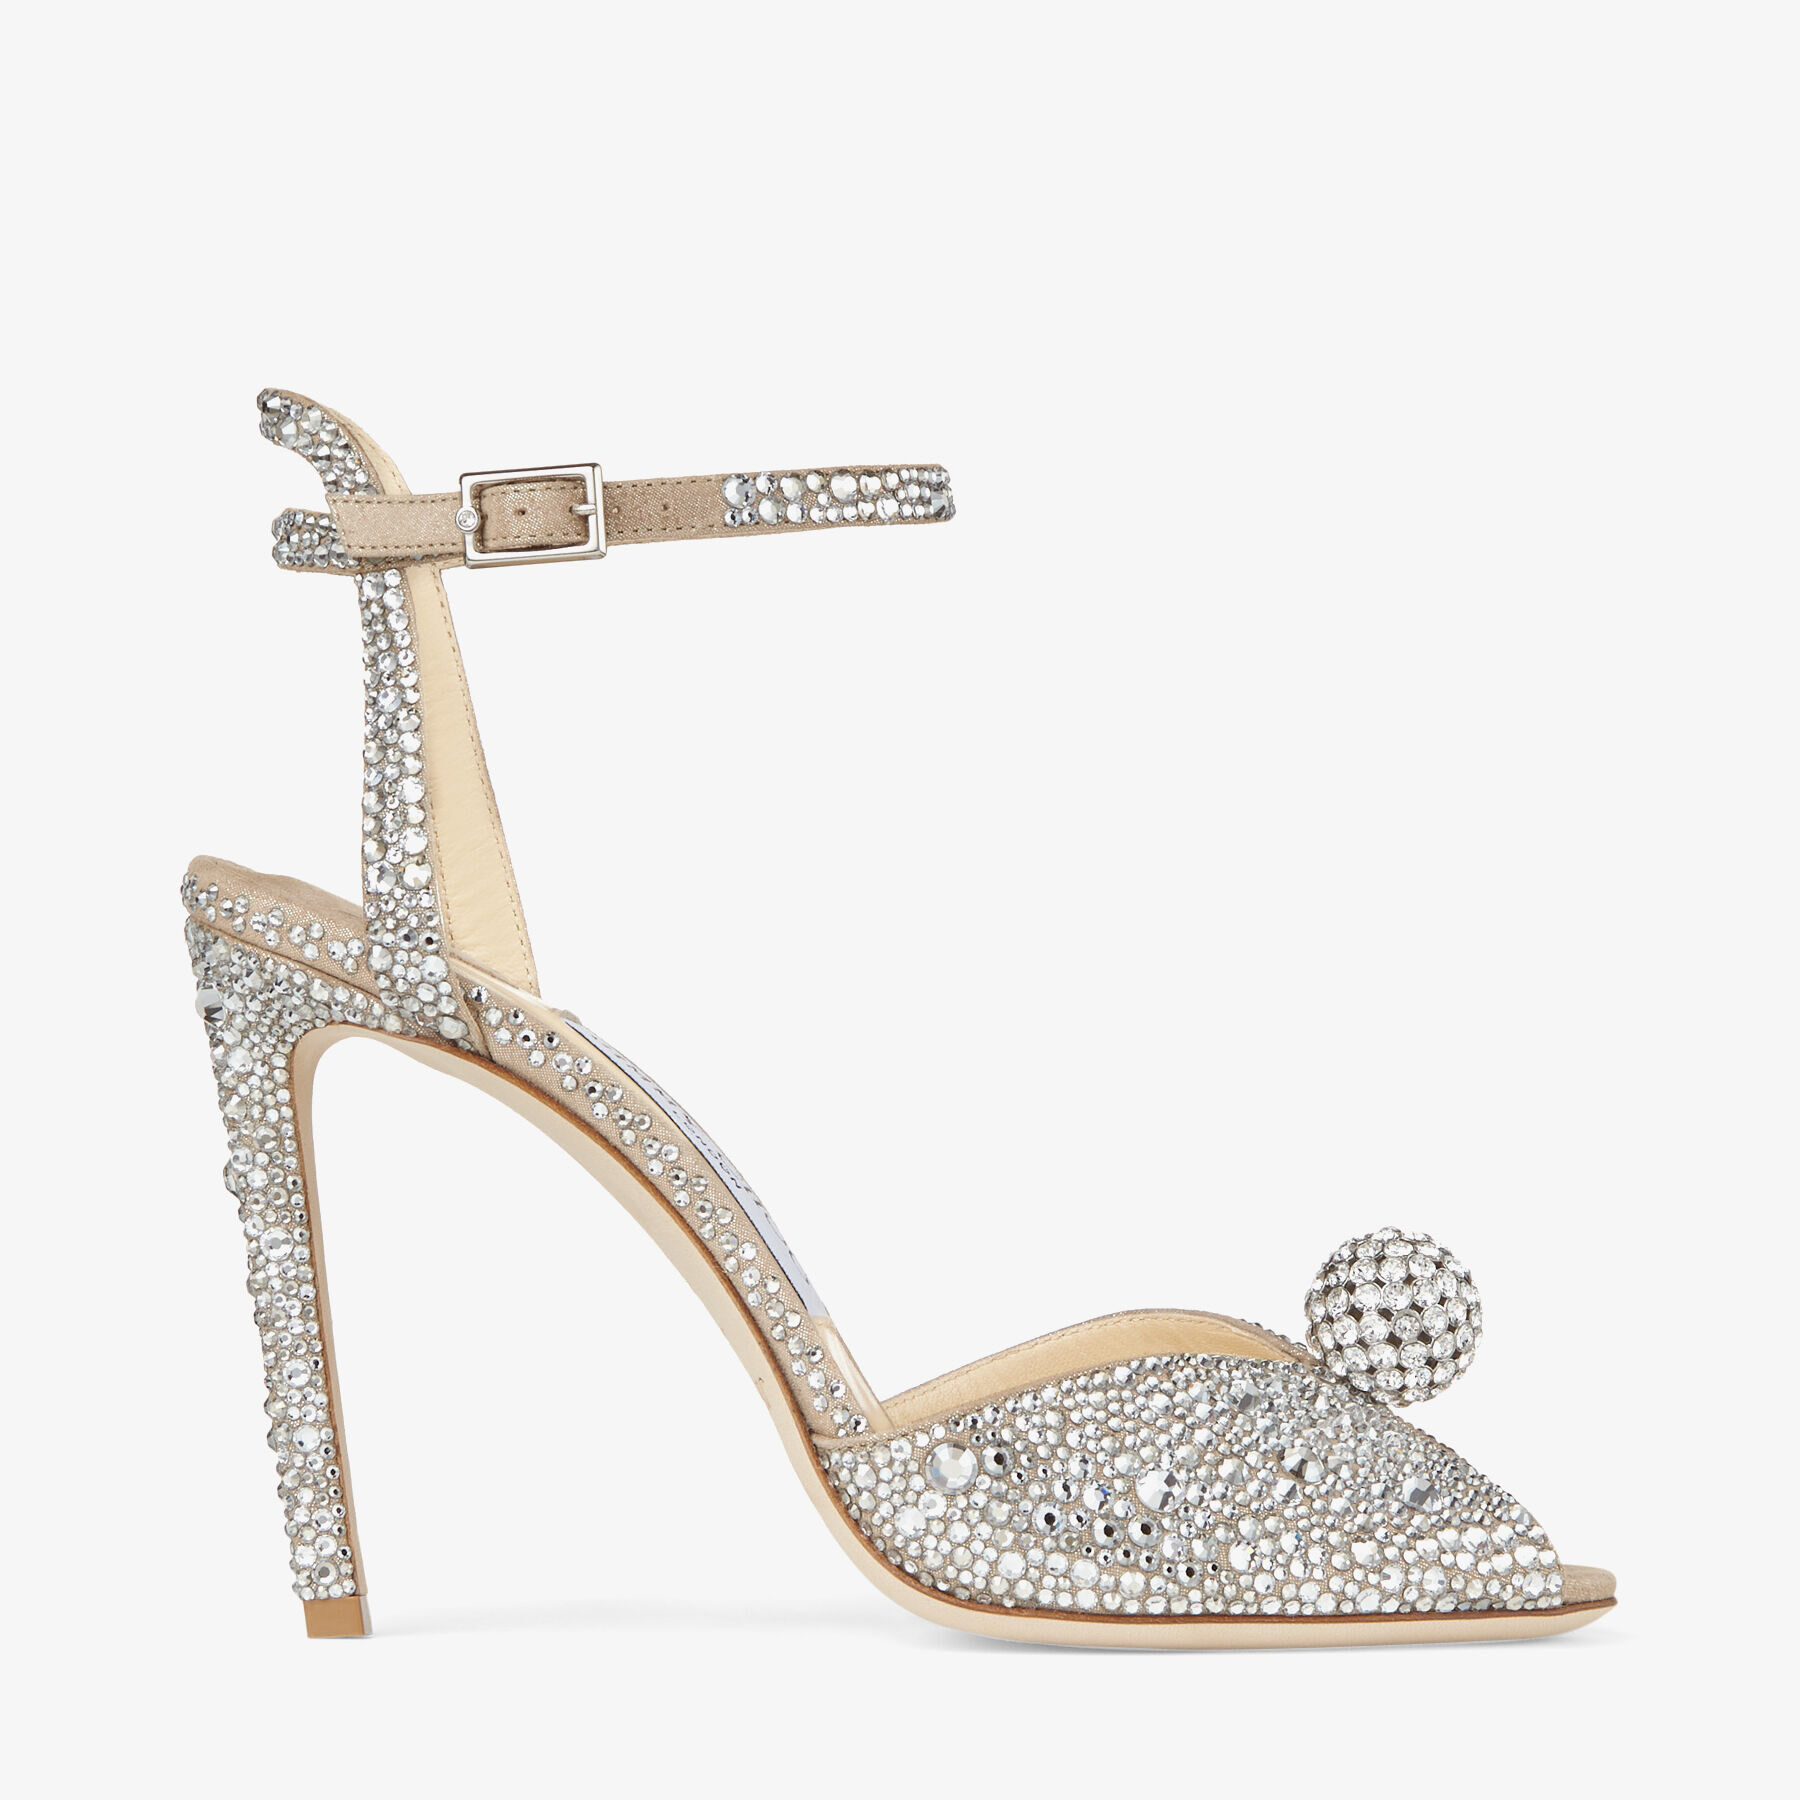 Nude Suede Sandals with Hotfix Crystals and Sphere Detail